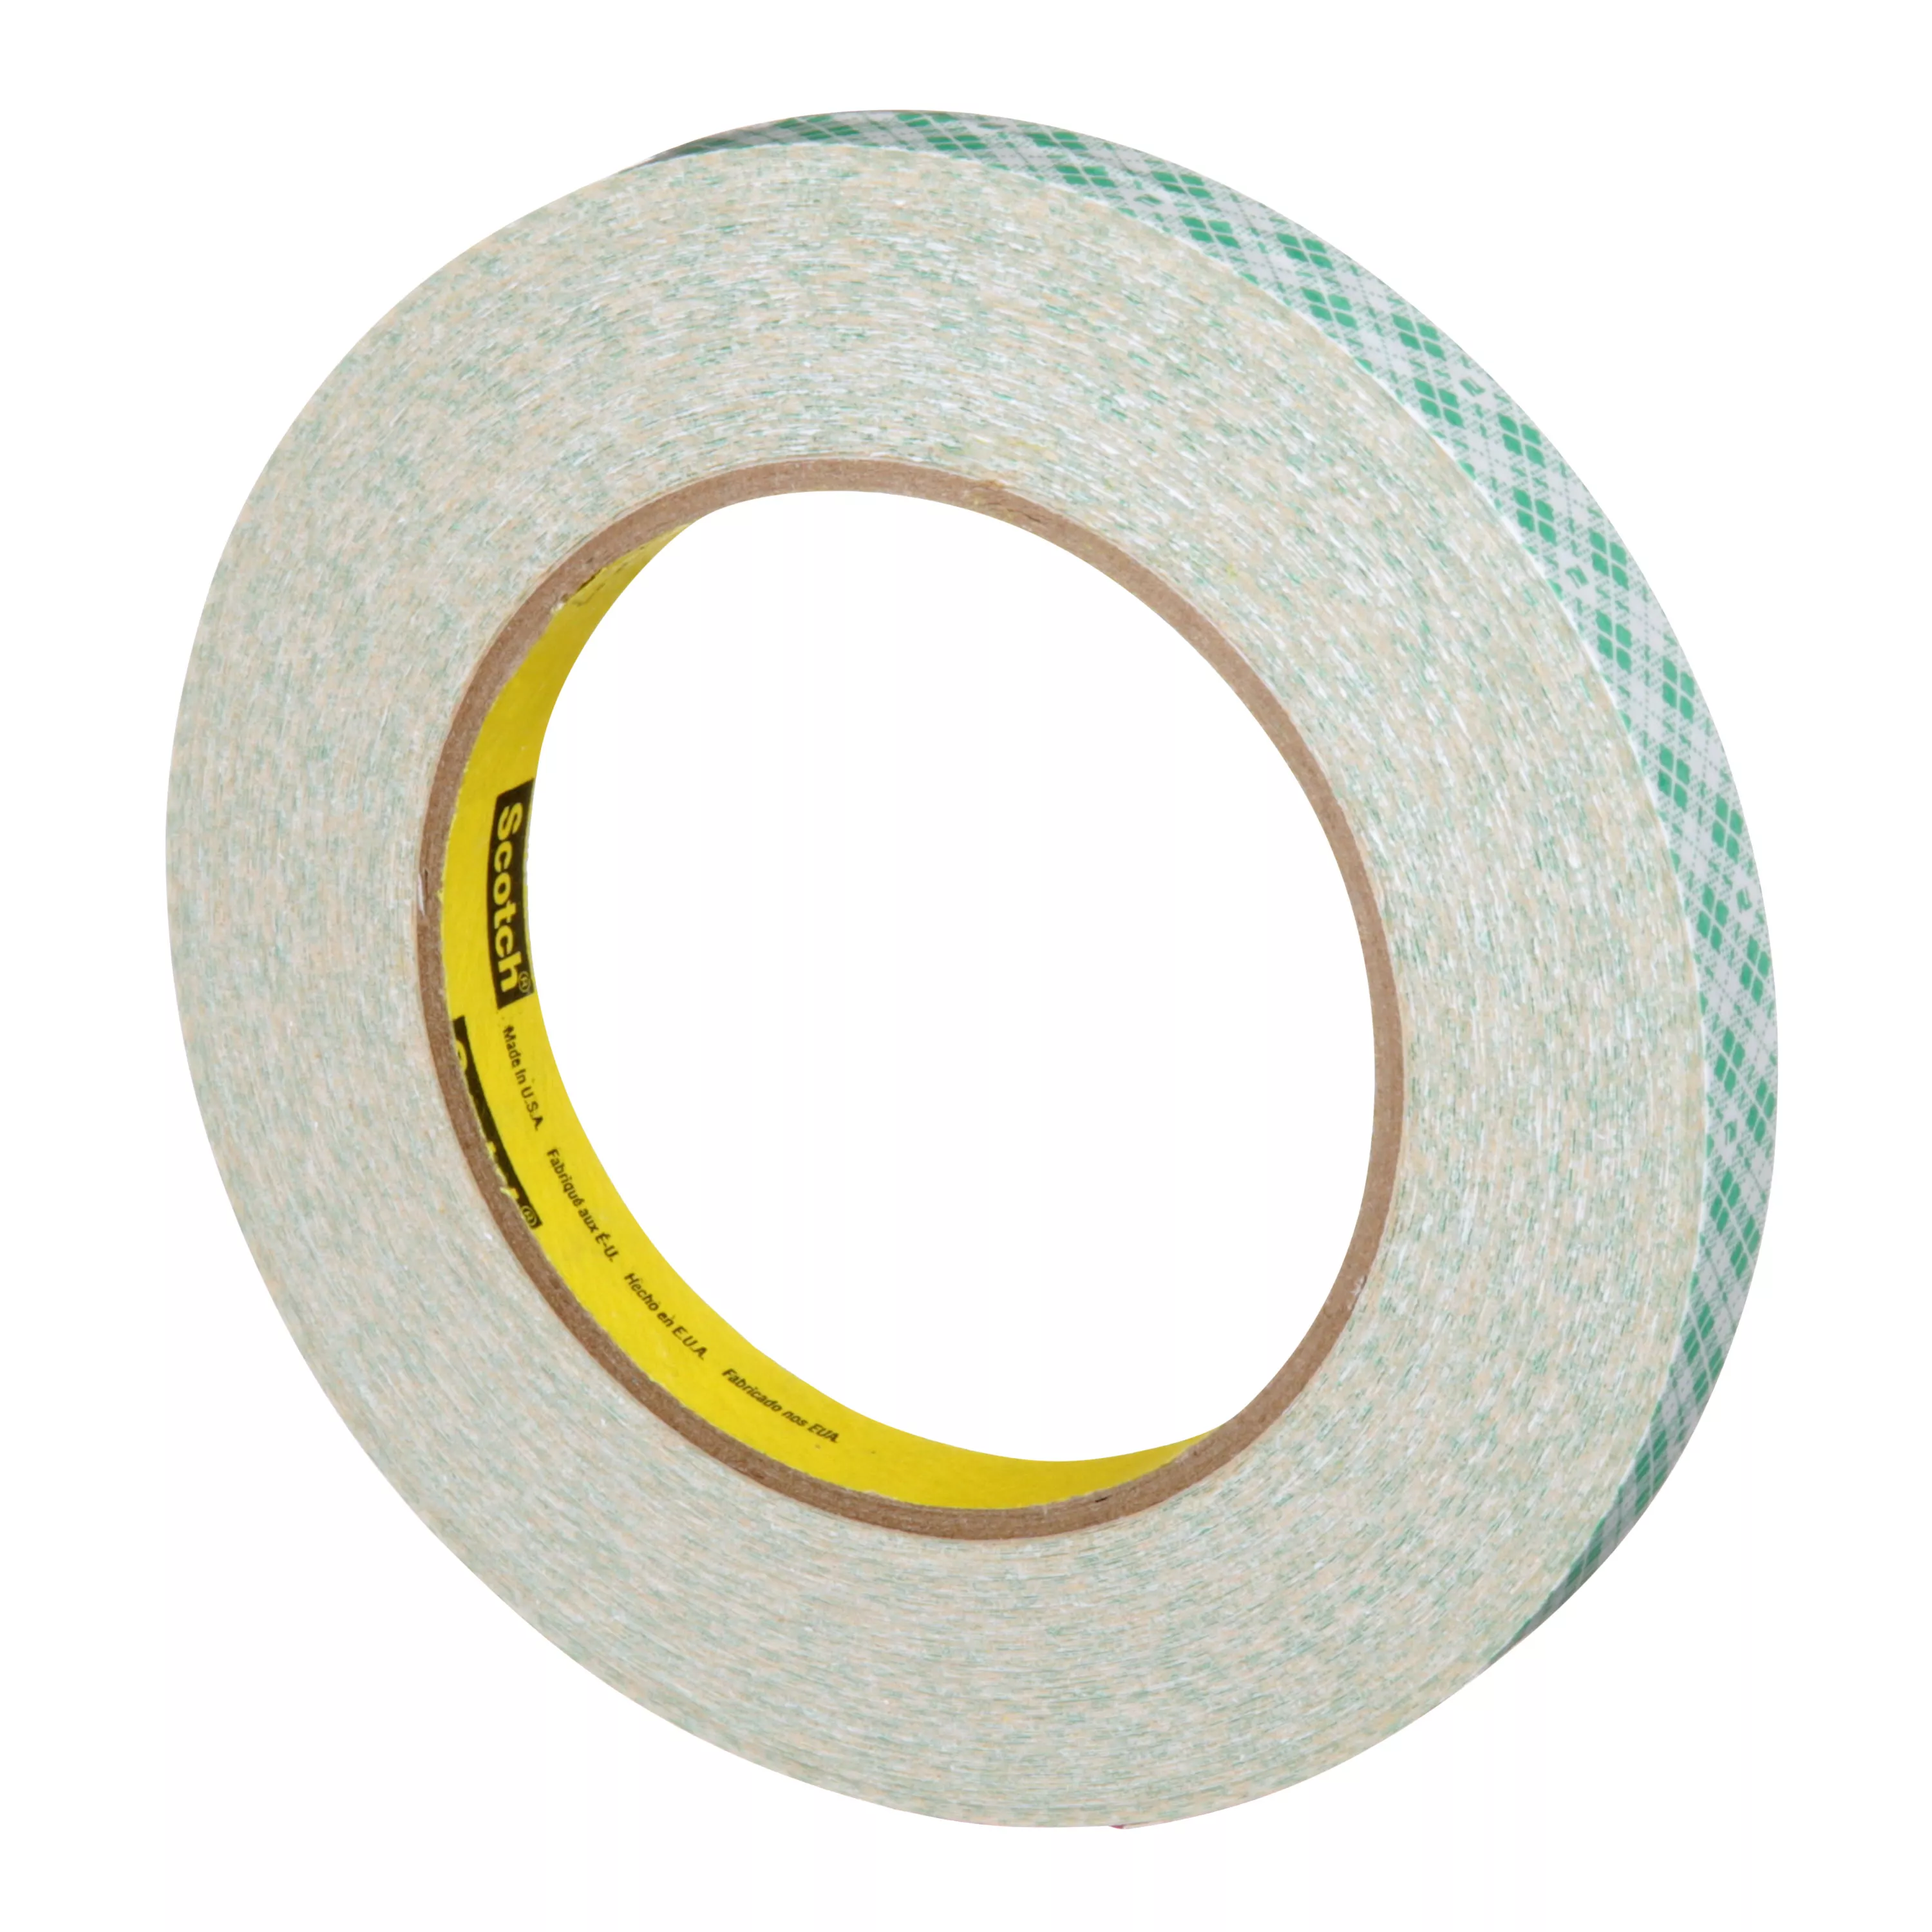 Product Number 410M | 3M™ Double Coated Paper Tape 410M